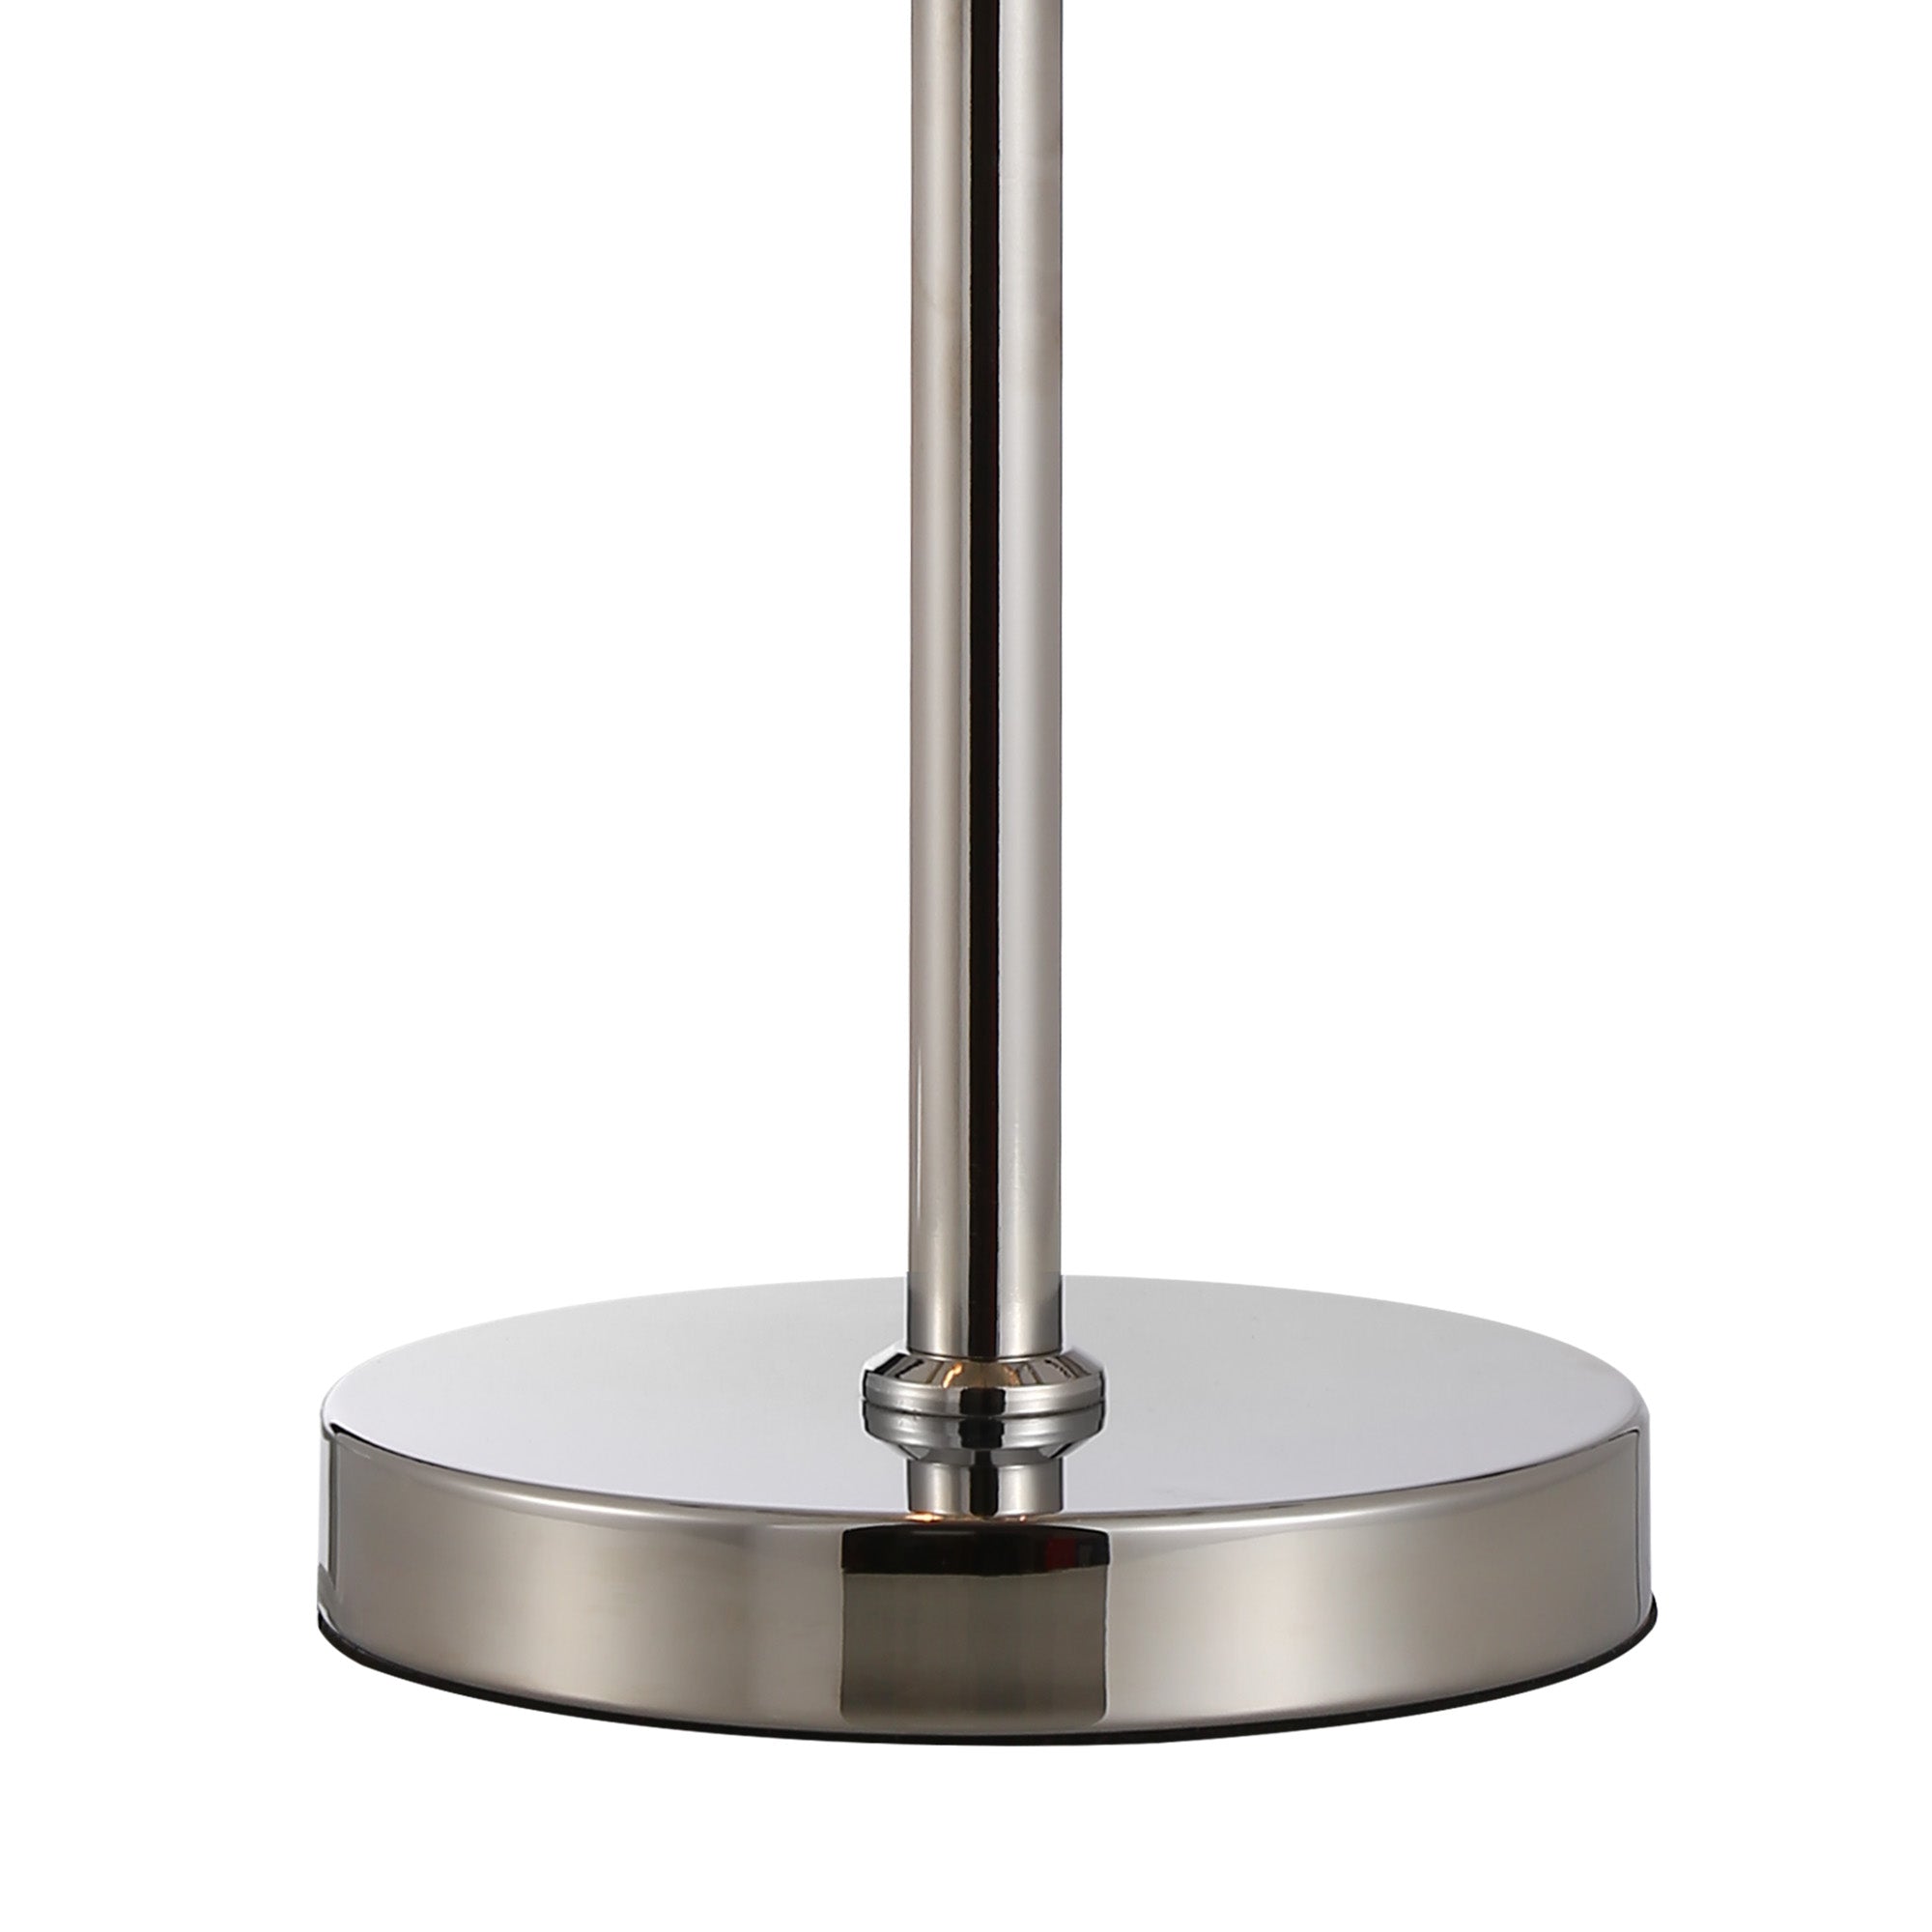 Lightologist Balmoral Table Lamp Polished Nickel / Clear LO191263